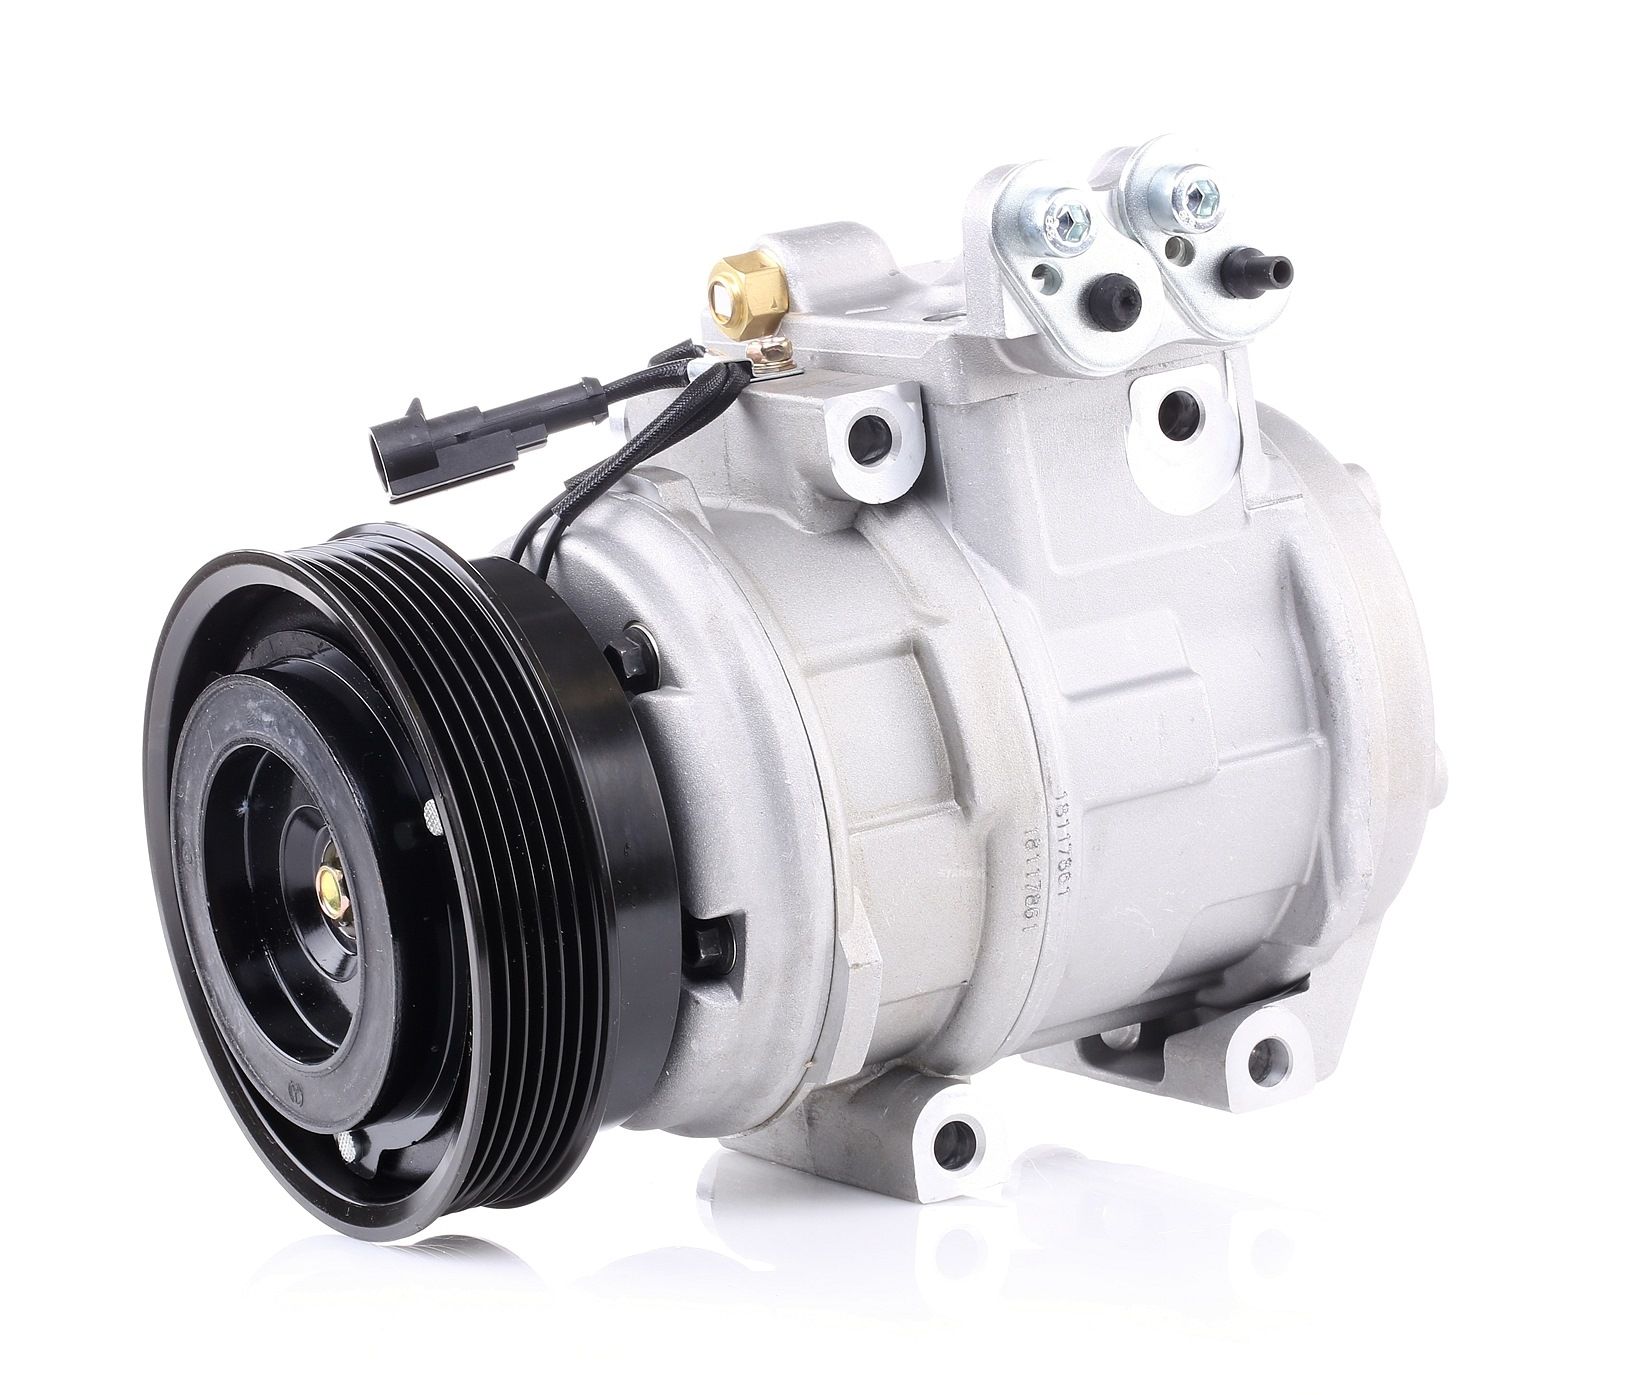 STARK SKKM-0340145 Air conditioning compressor 10PA17C, PAG 46, R 134a, with PAG compressor oil